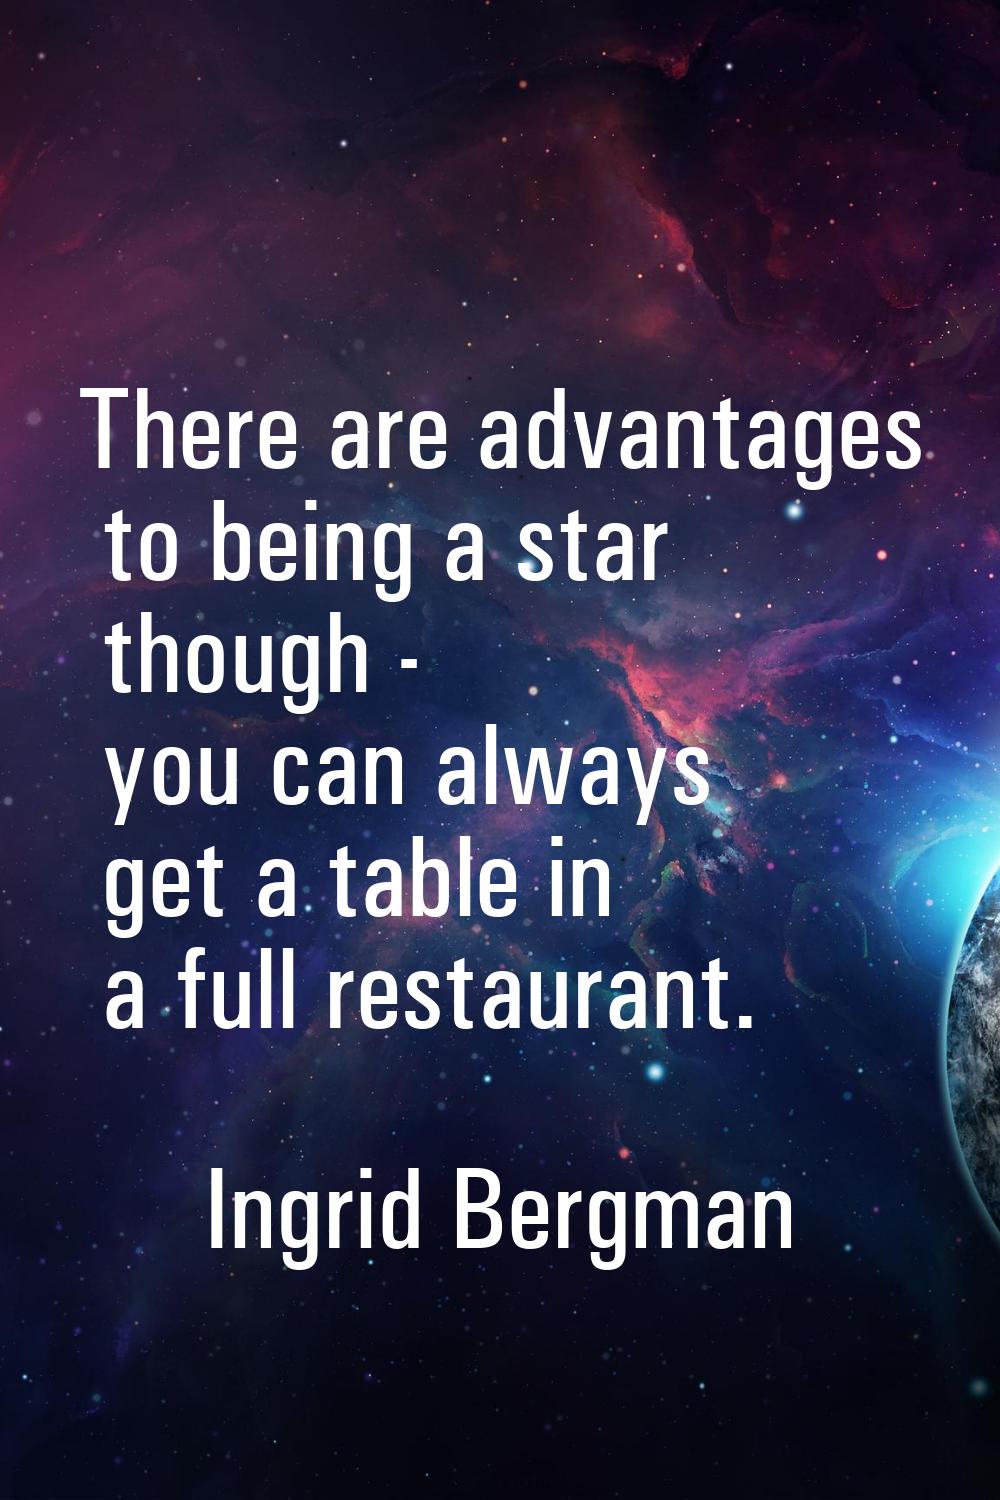 There are advantages to being a star though - you can always get a table in a full restaurant.